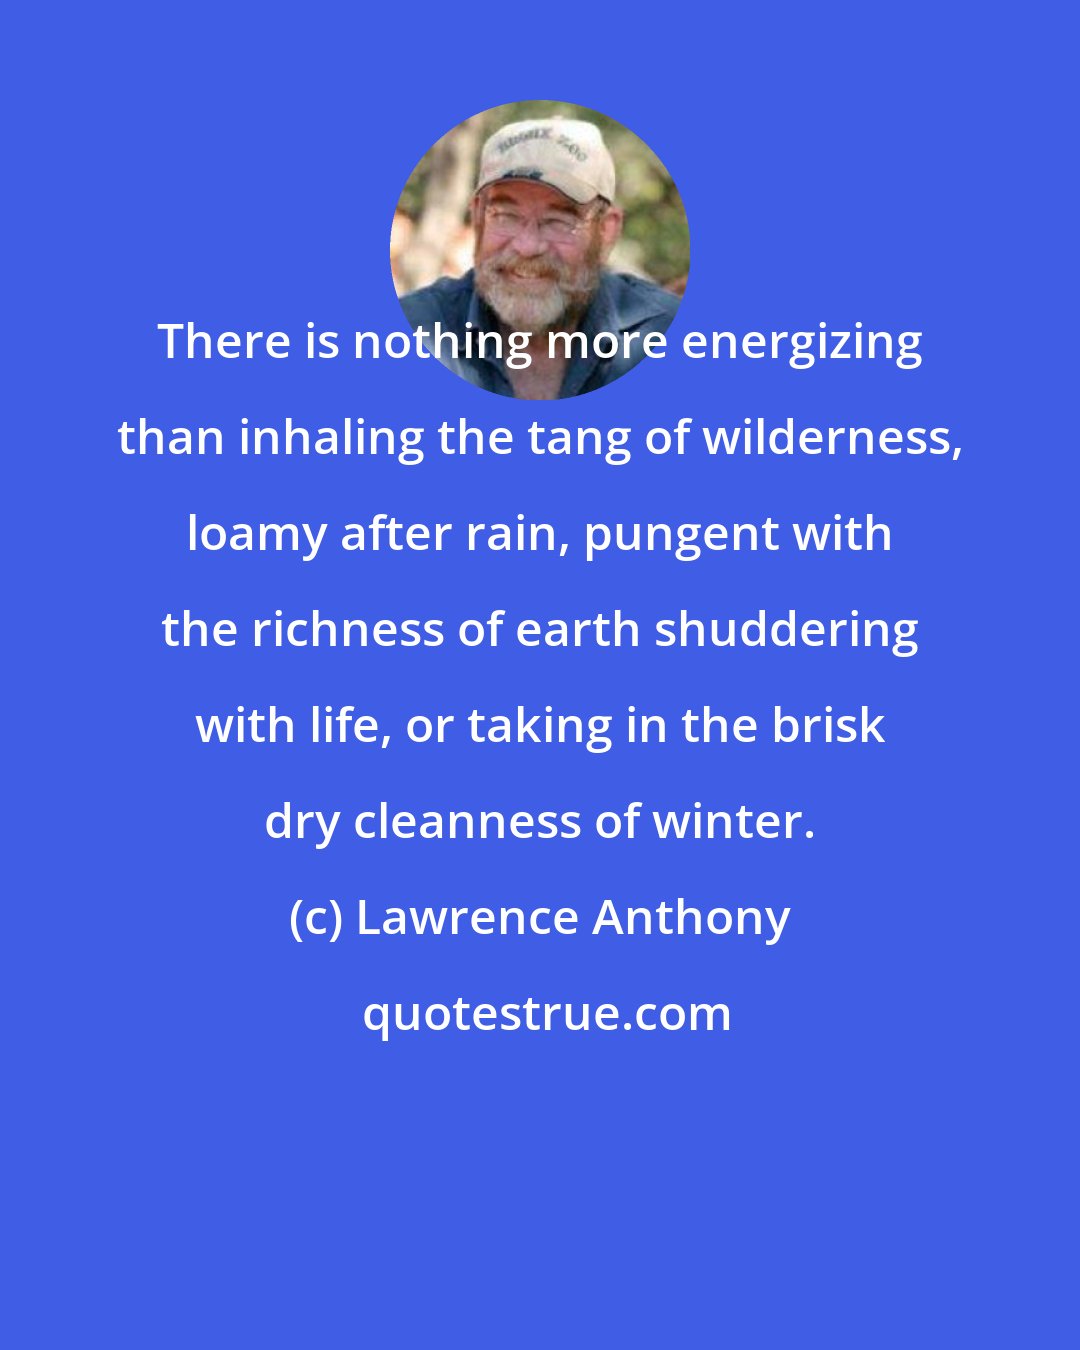 Lawrence Anthony: There is nothing more energizing than inhaling the tang of wilderness, loamy after rain, pungent with the richness of earth shuddering with life, or taking in the brisk dry cleanness of winter.